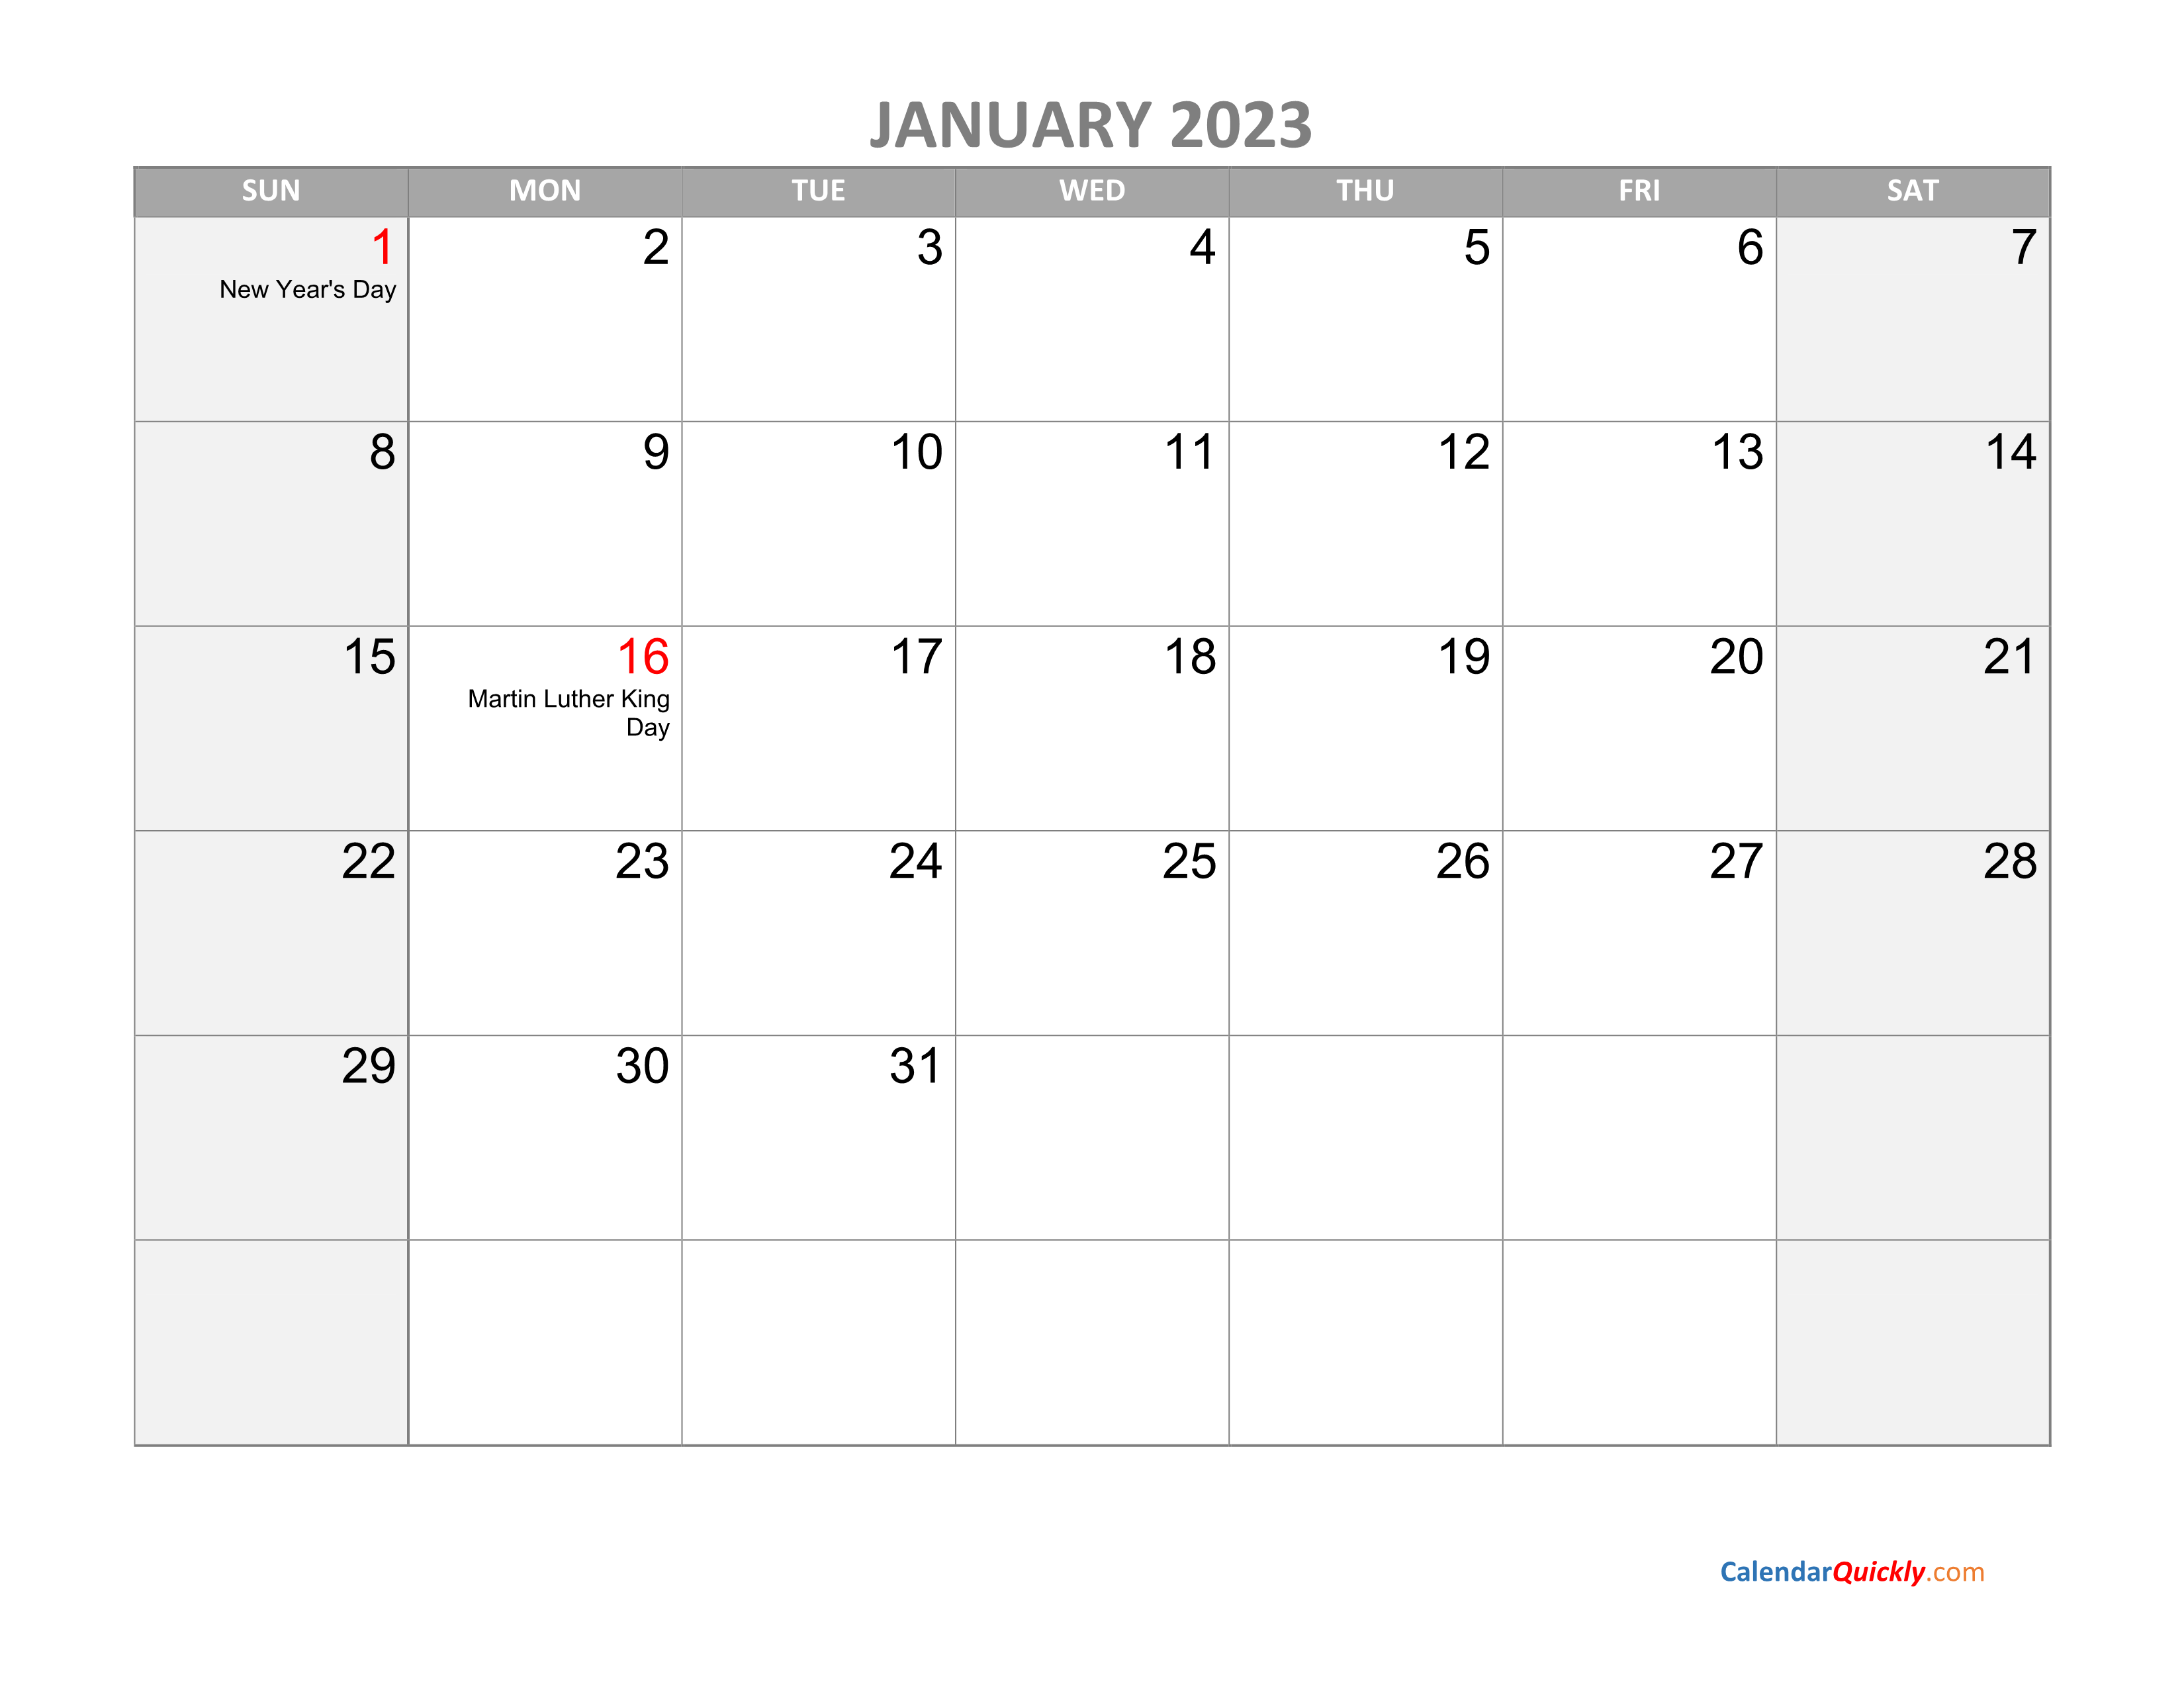 Monthly Calendar 2023 with Holidays Calendar Quickly